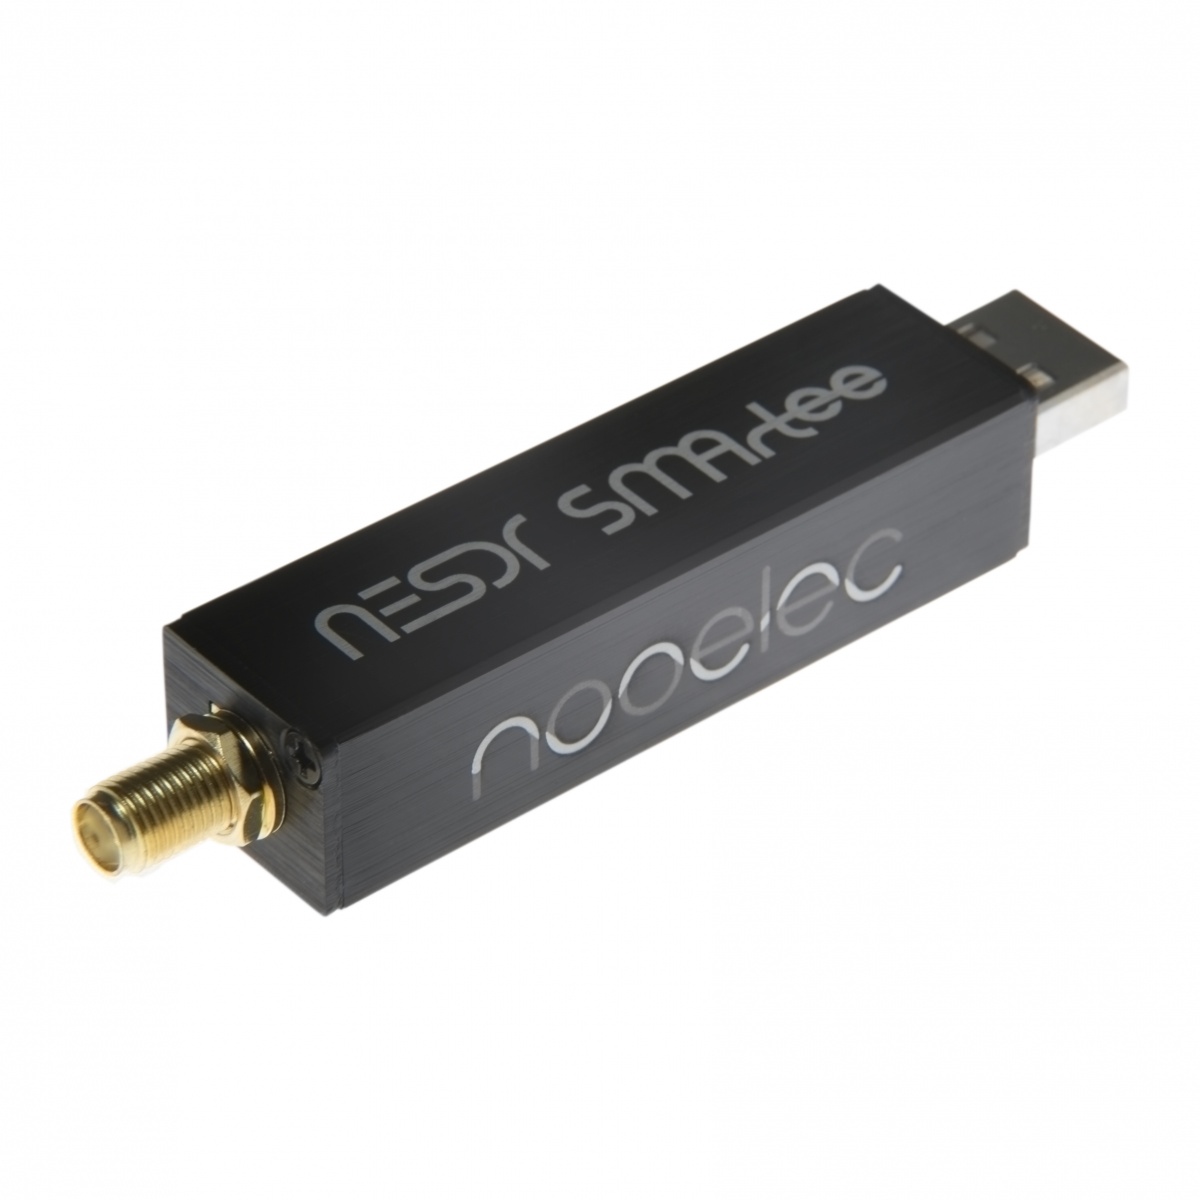 New RTL-SDR Drivers and SDR-Console ExtIO Available: Bias Tee Support,  Direct Sampling, Tunable IF Filters and Improved Gain Profiles